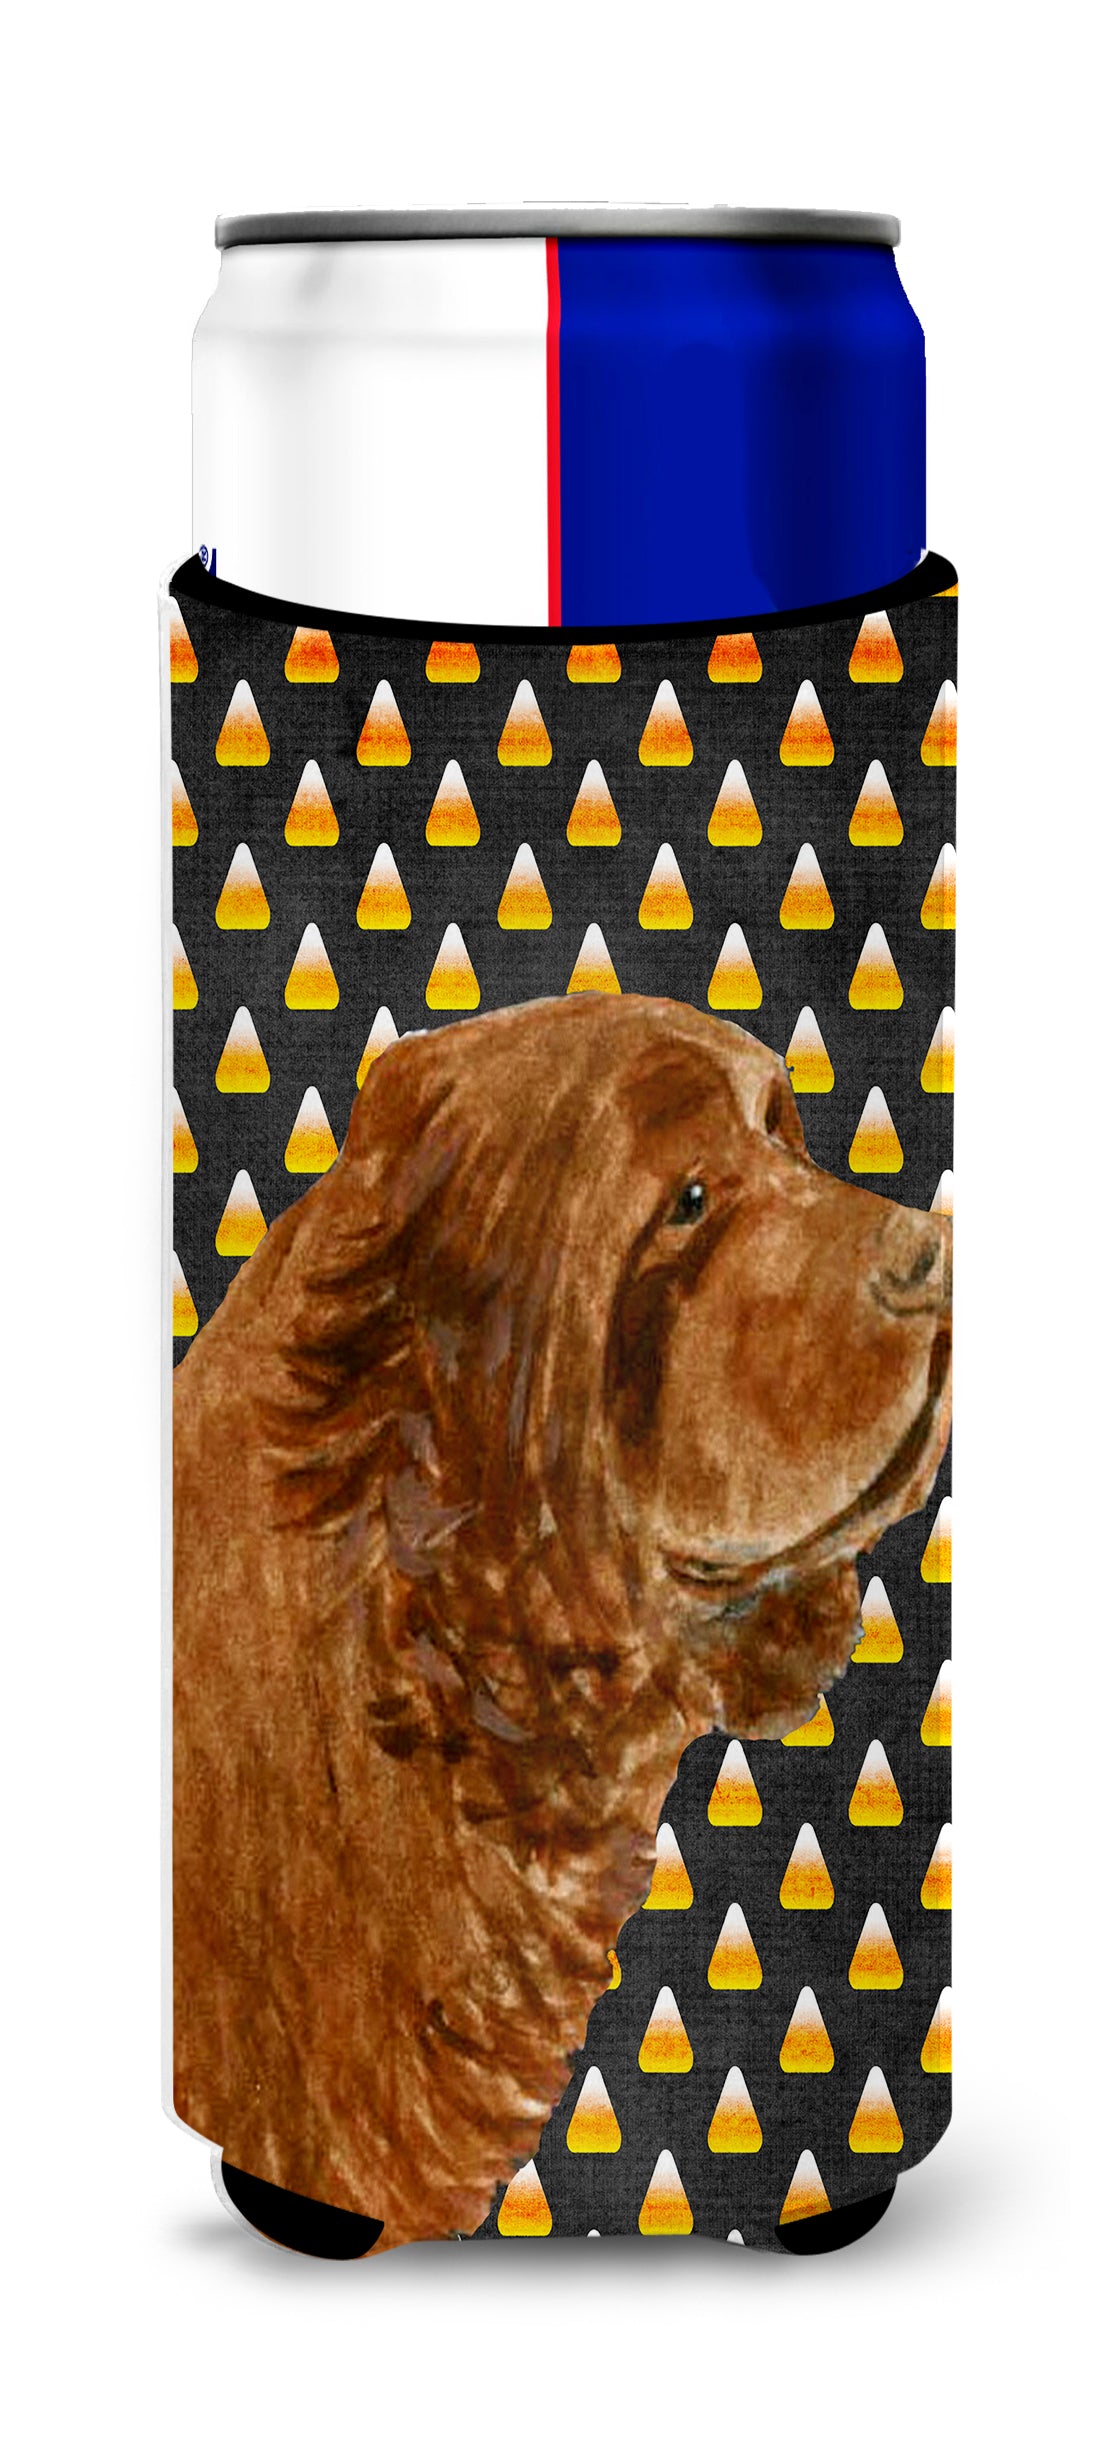 Sussex Spaniel Candy Corn Halloween Portrait Ultra Beverage Insulators for slim cans SS4303MUK.